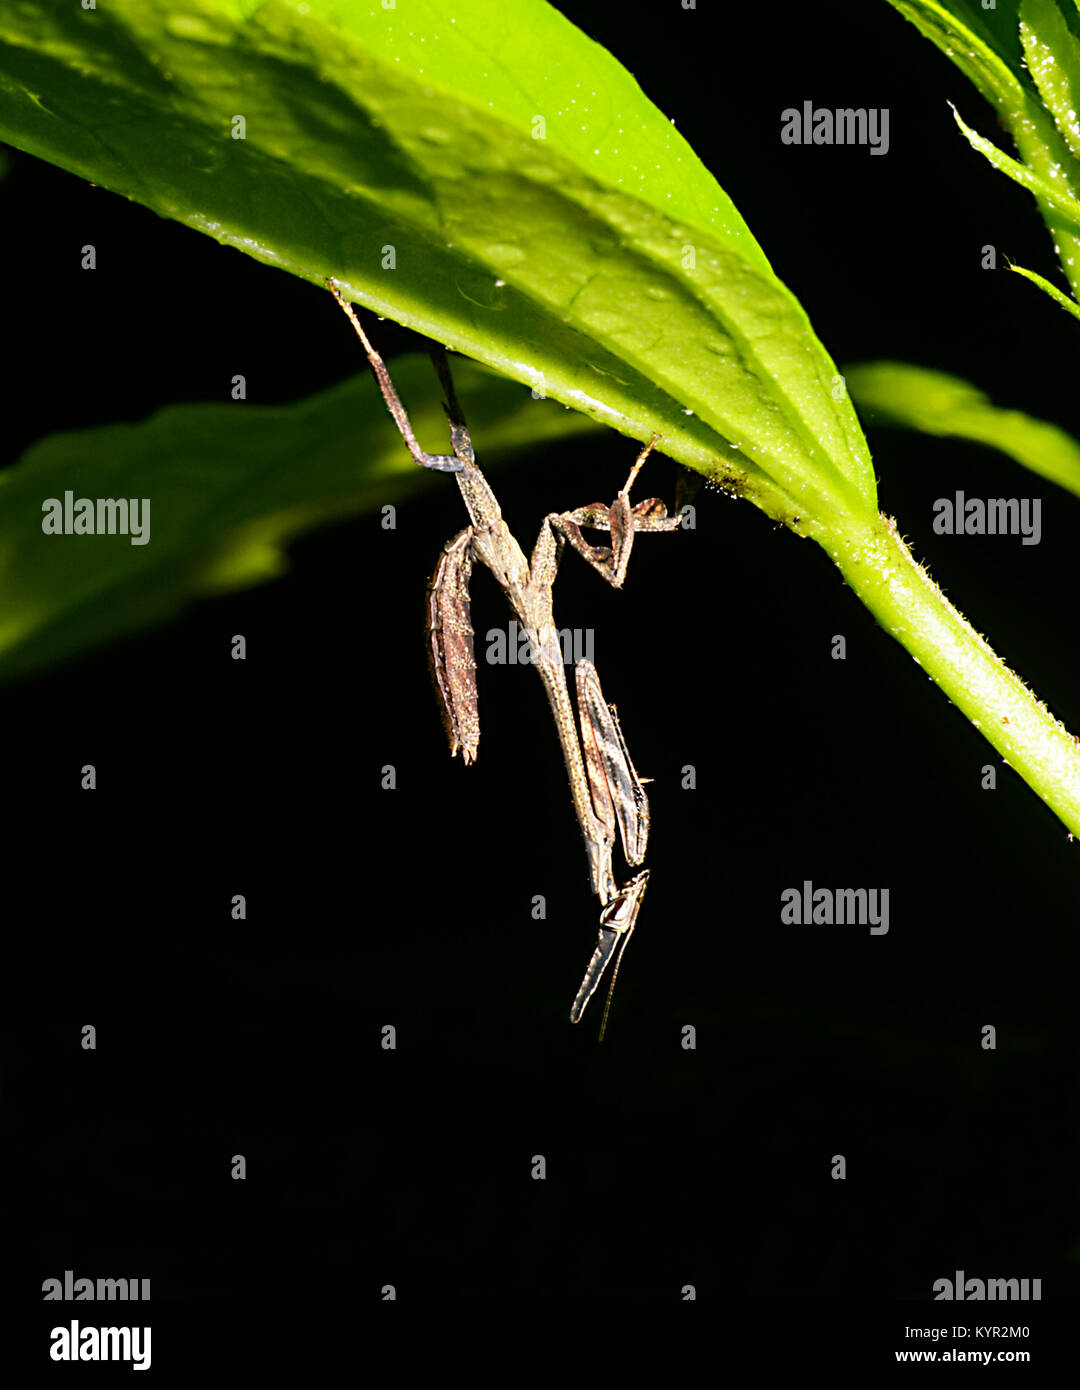 Close-up of a Flower Mantis resting upside down on foliage, Tabin, Borneo, Sabah, Malaysia Stock Photo